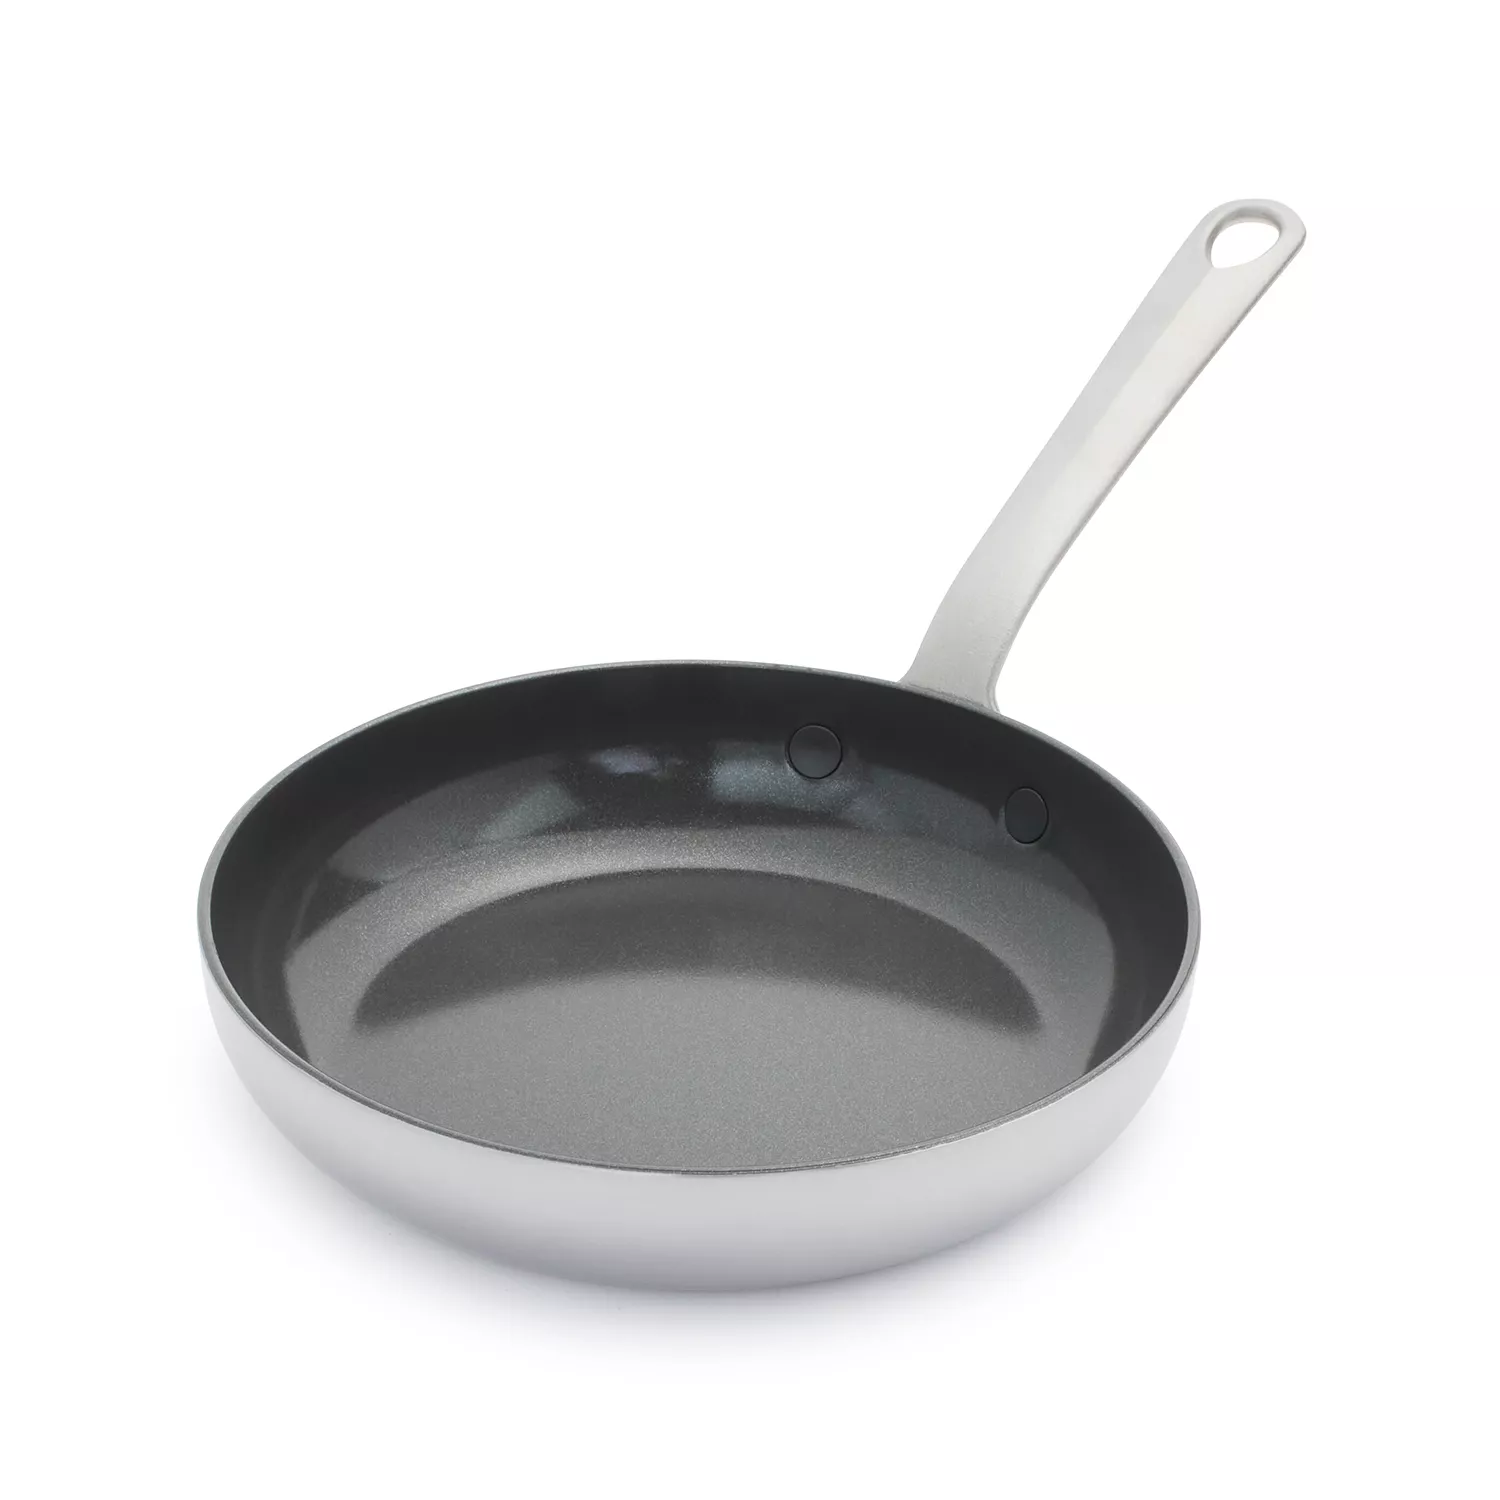 The Greenpan Is the Best Frying Pan I've Ever Tried